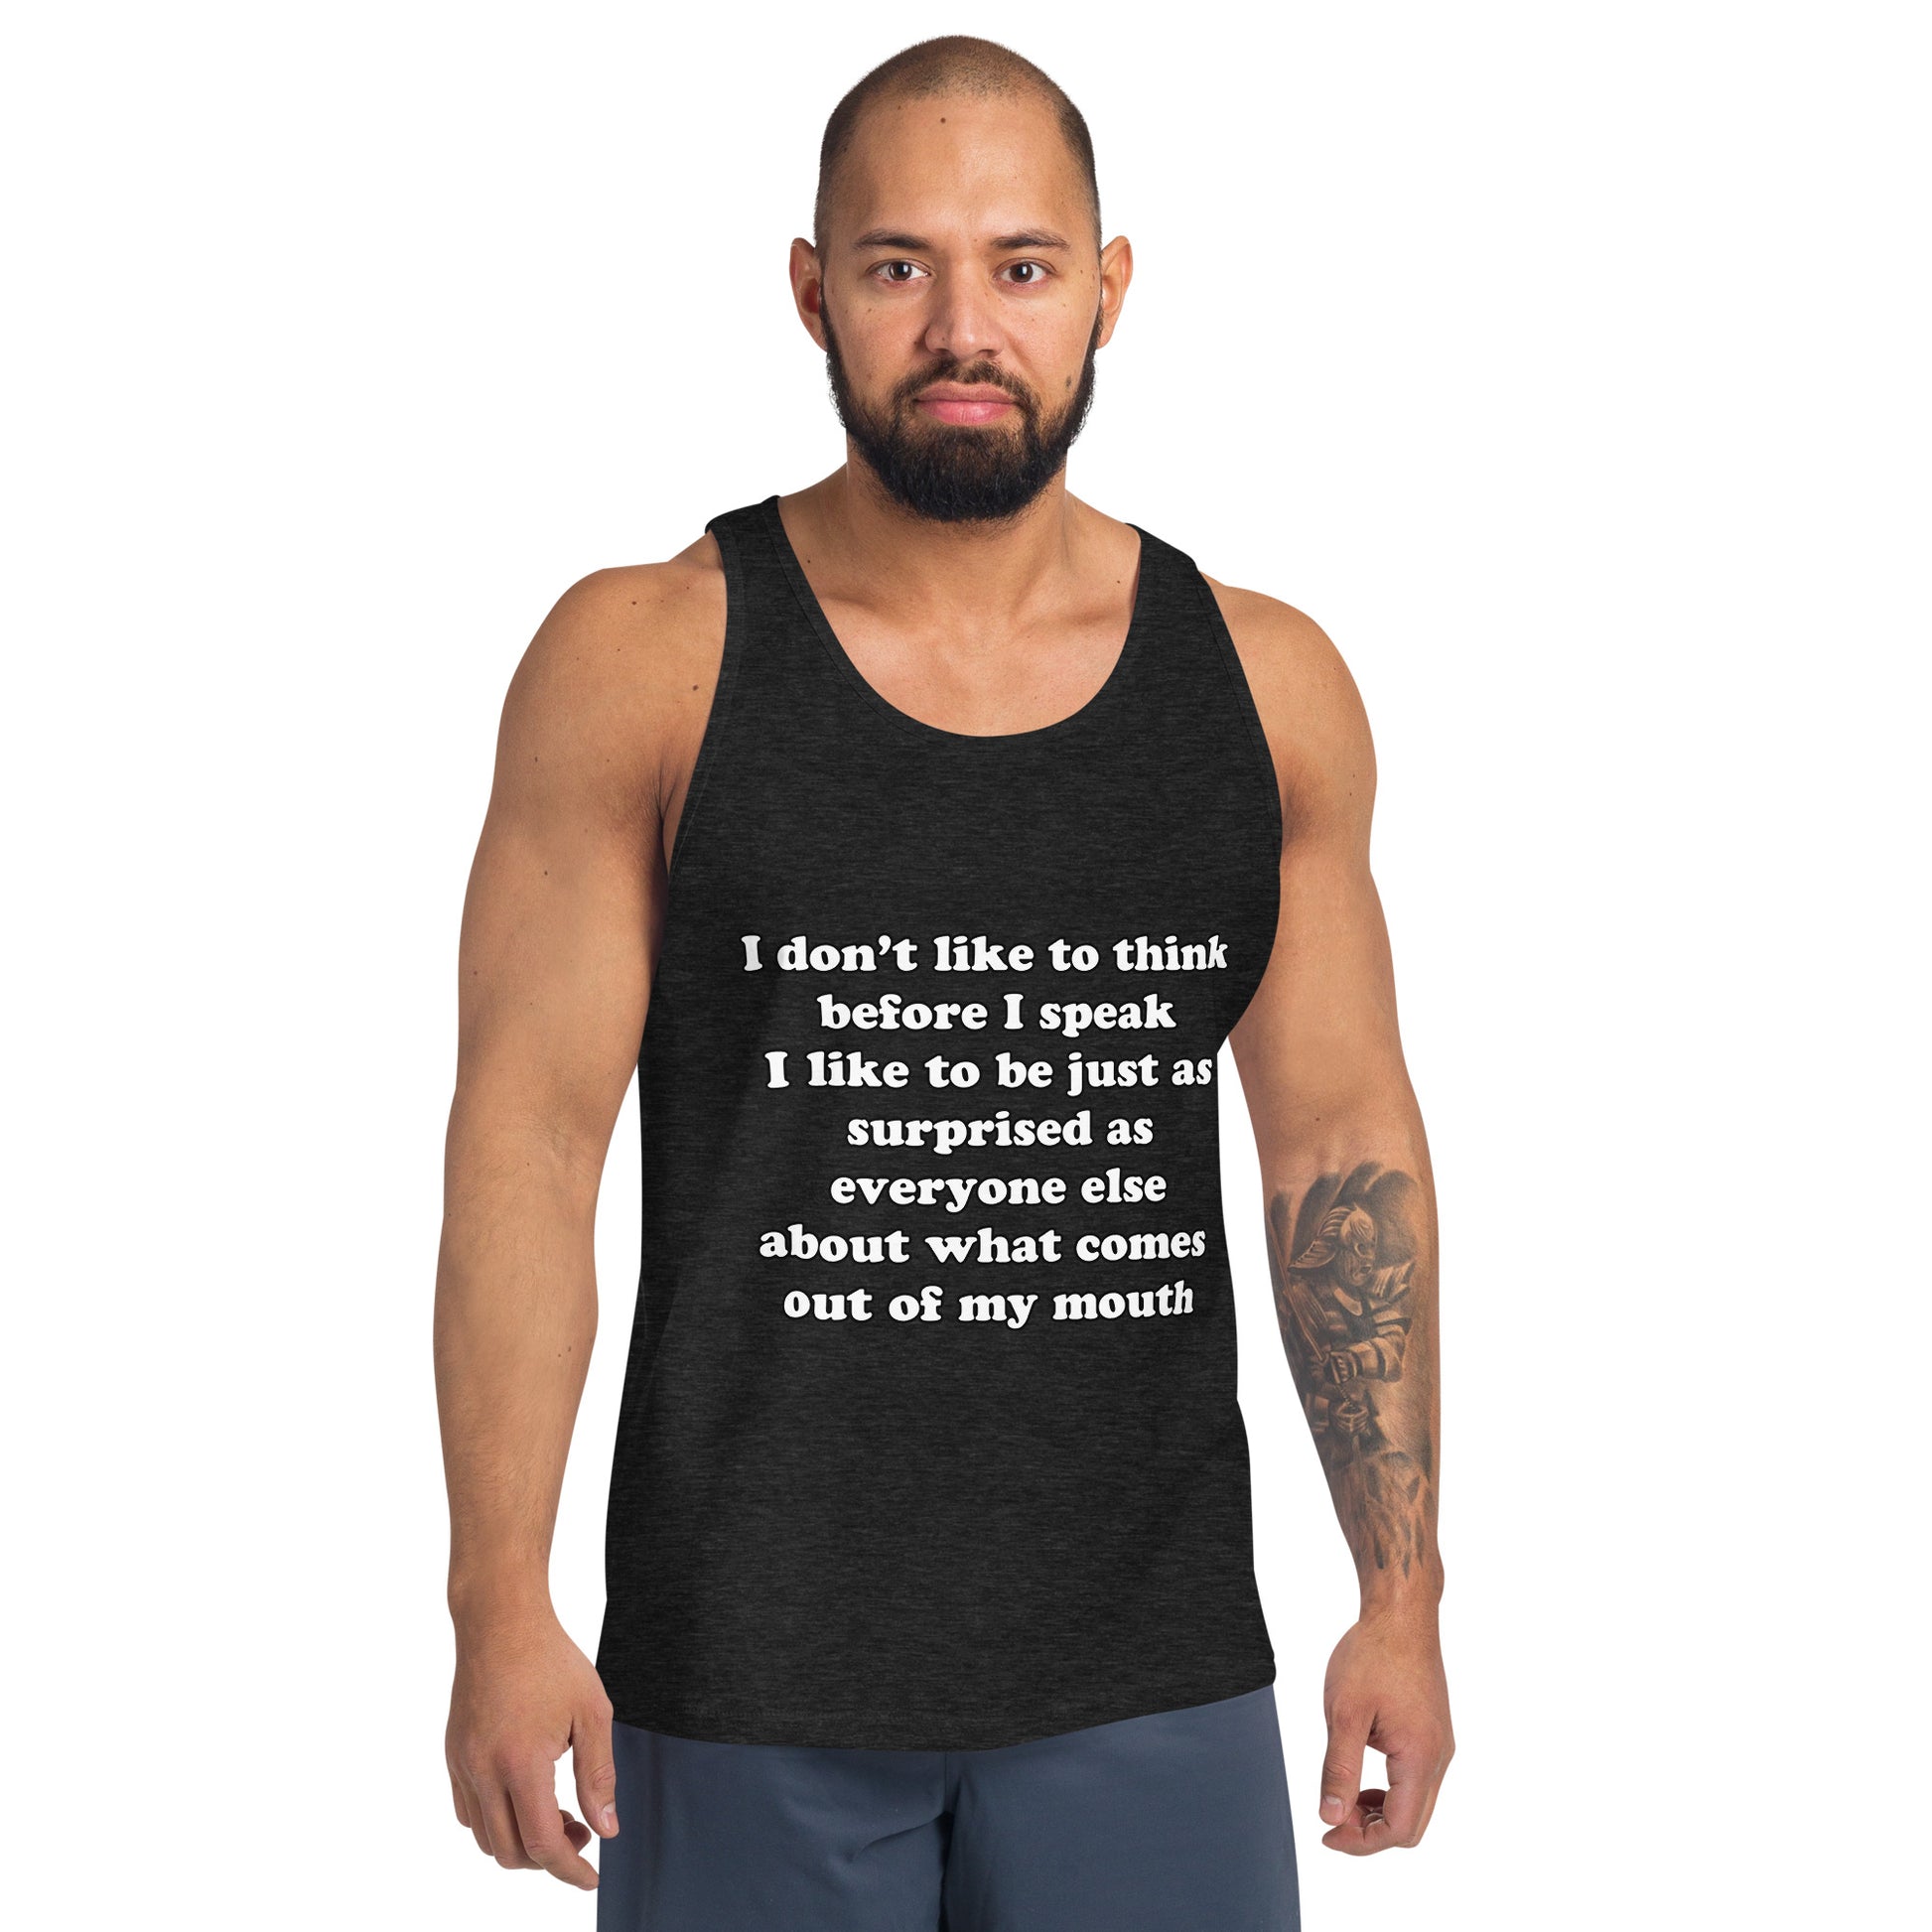 Man with black tank top with text “I don't think before I speak Just as serprised as everyone about what comes out of my mouth"